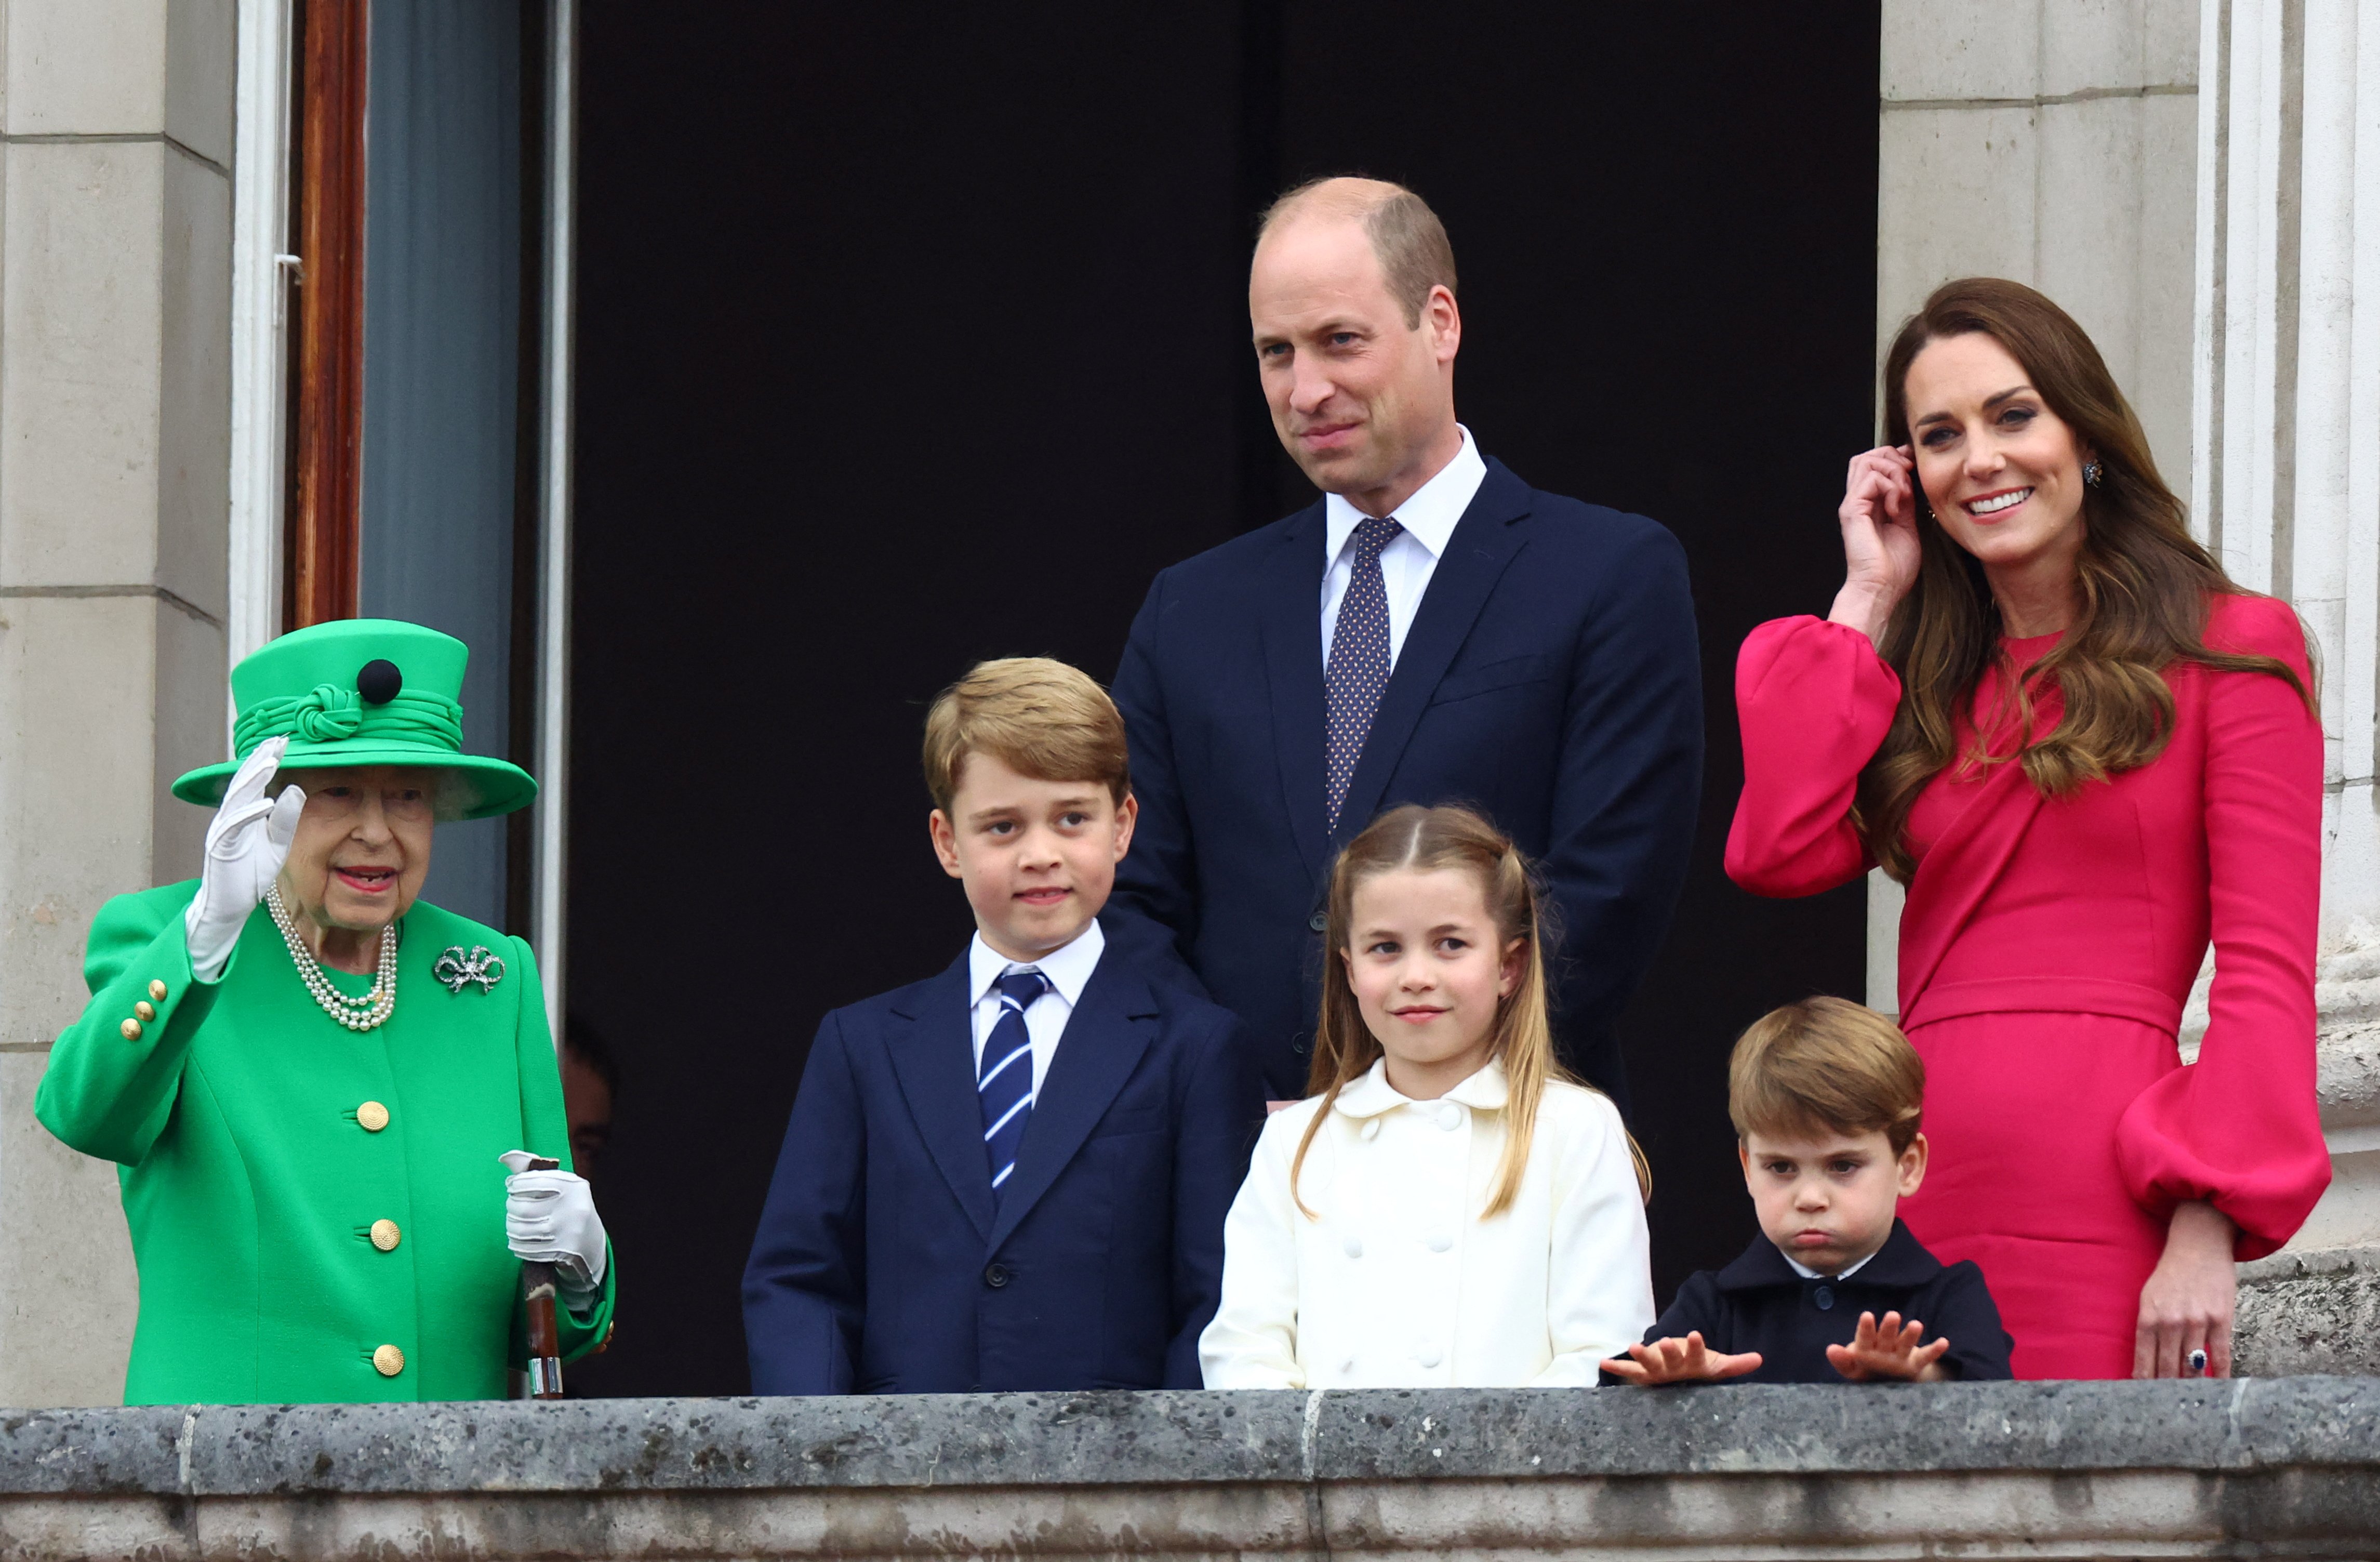 Queen Elizabeth II, Prince George of Cambridge, Prince William, Duke of Cambridge, Princess Charlotte of Cambridge, Prince Louis of Cambridge and Catherine, Duchess of Cambridge stand on a balcony during the Platinum Jubilee Pageant on June 05, 2022 in London, England. | Source: Getty Images